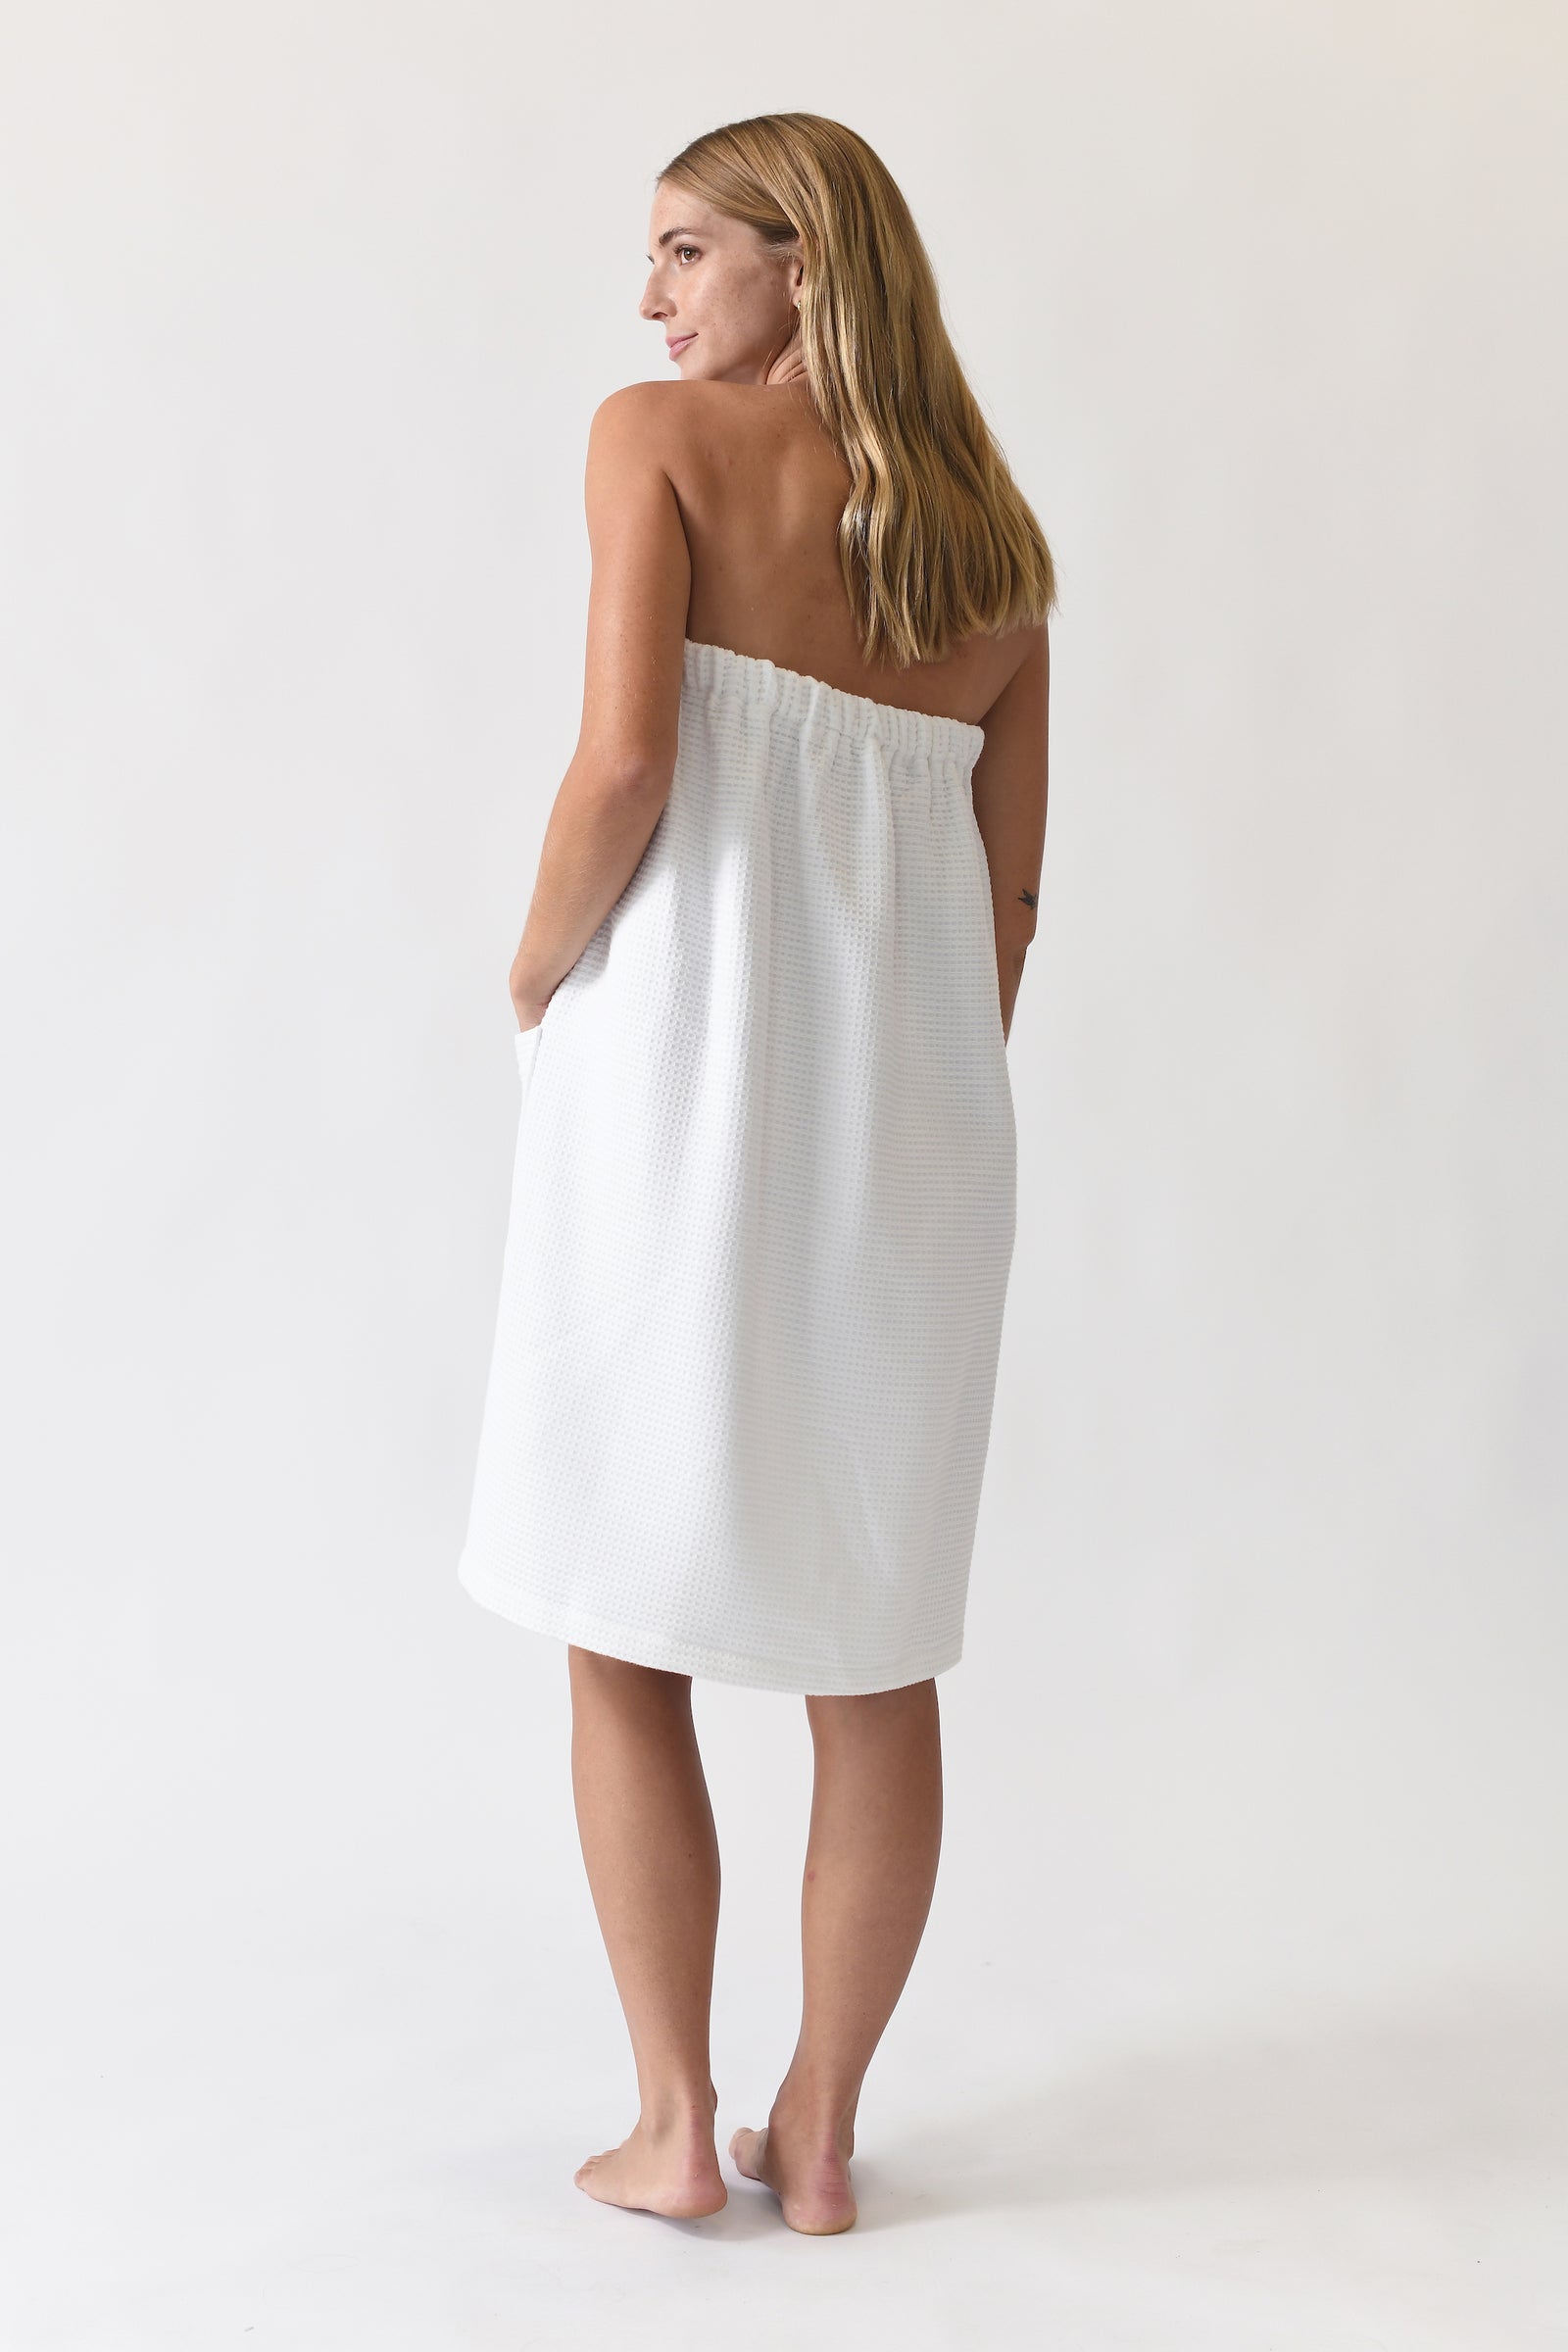 White Waffle Bath Wrap. The bath wrap is shown being worn by a woman. Photo was taken with a white background.